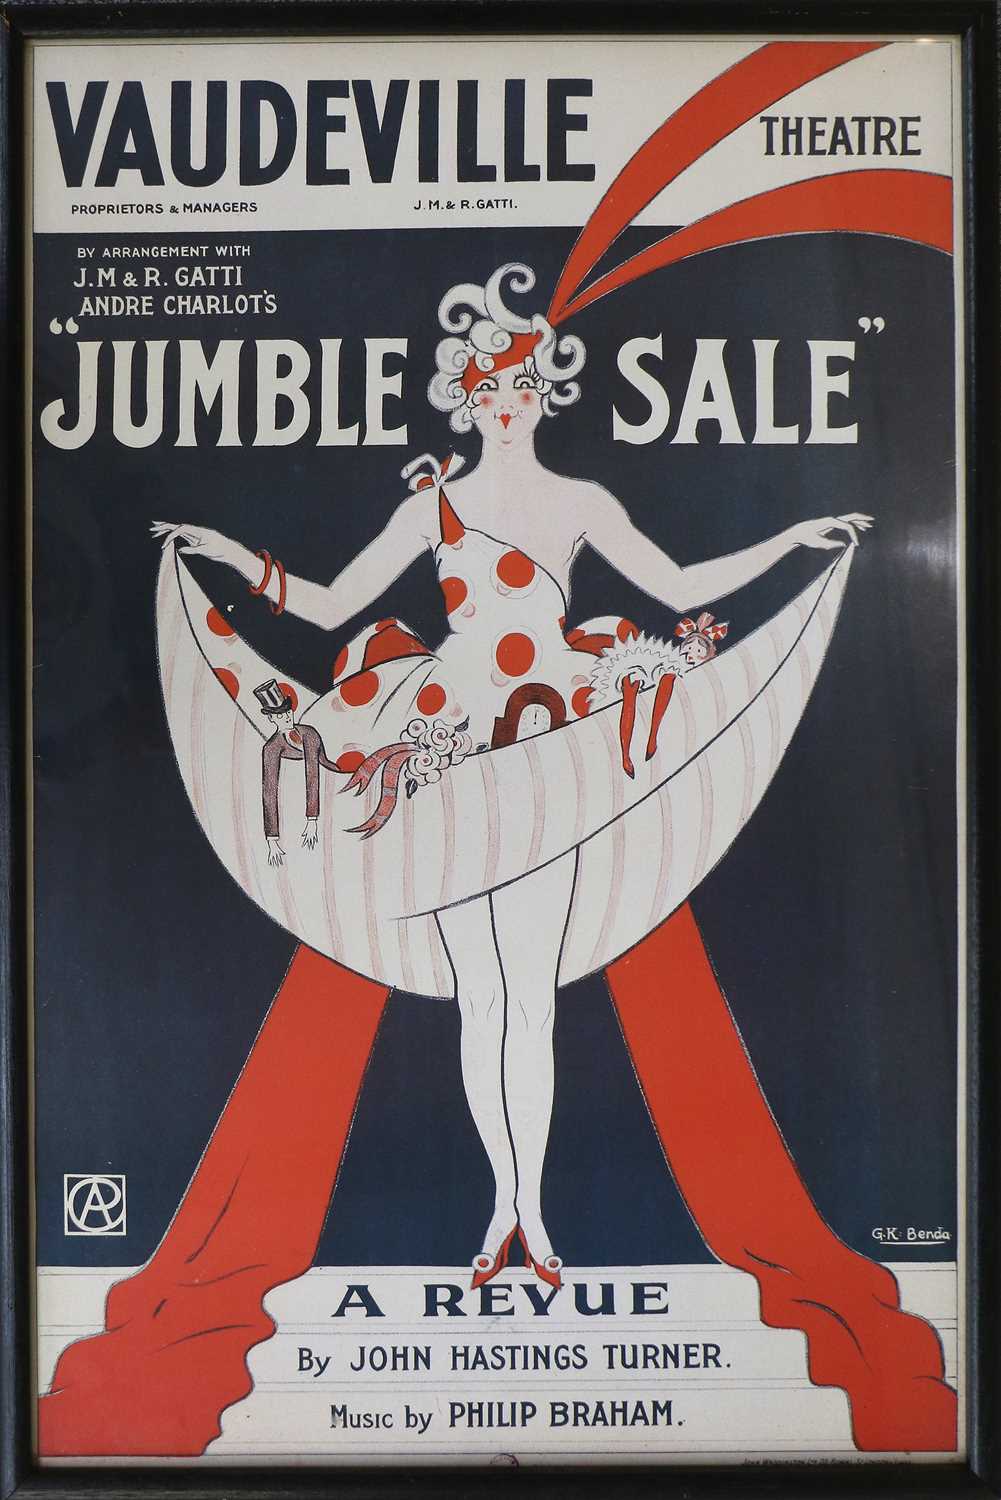 Various Opera and Ballet Posters - Image 4 of 11